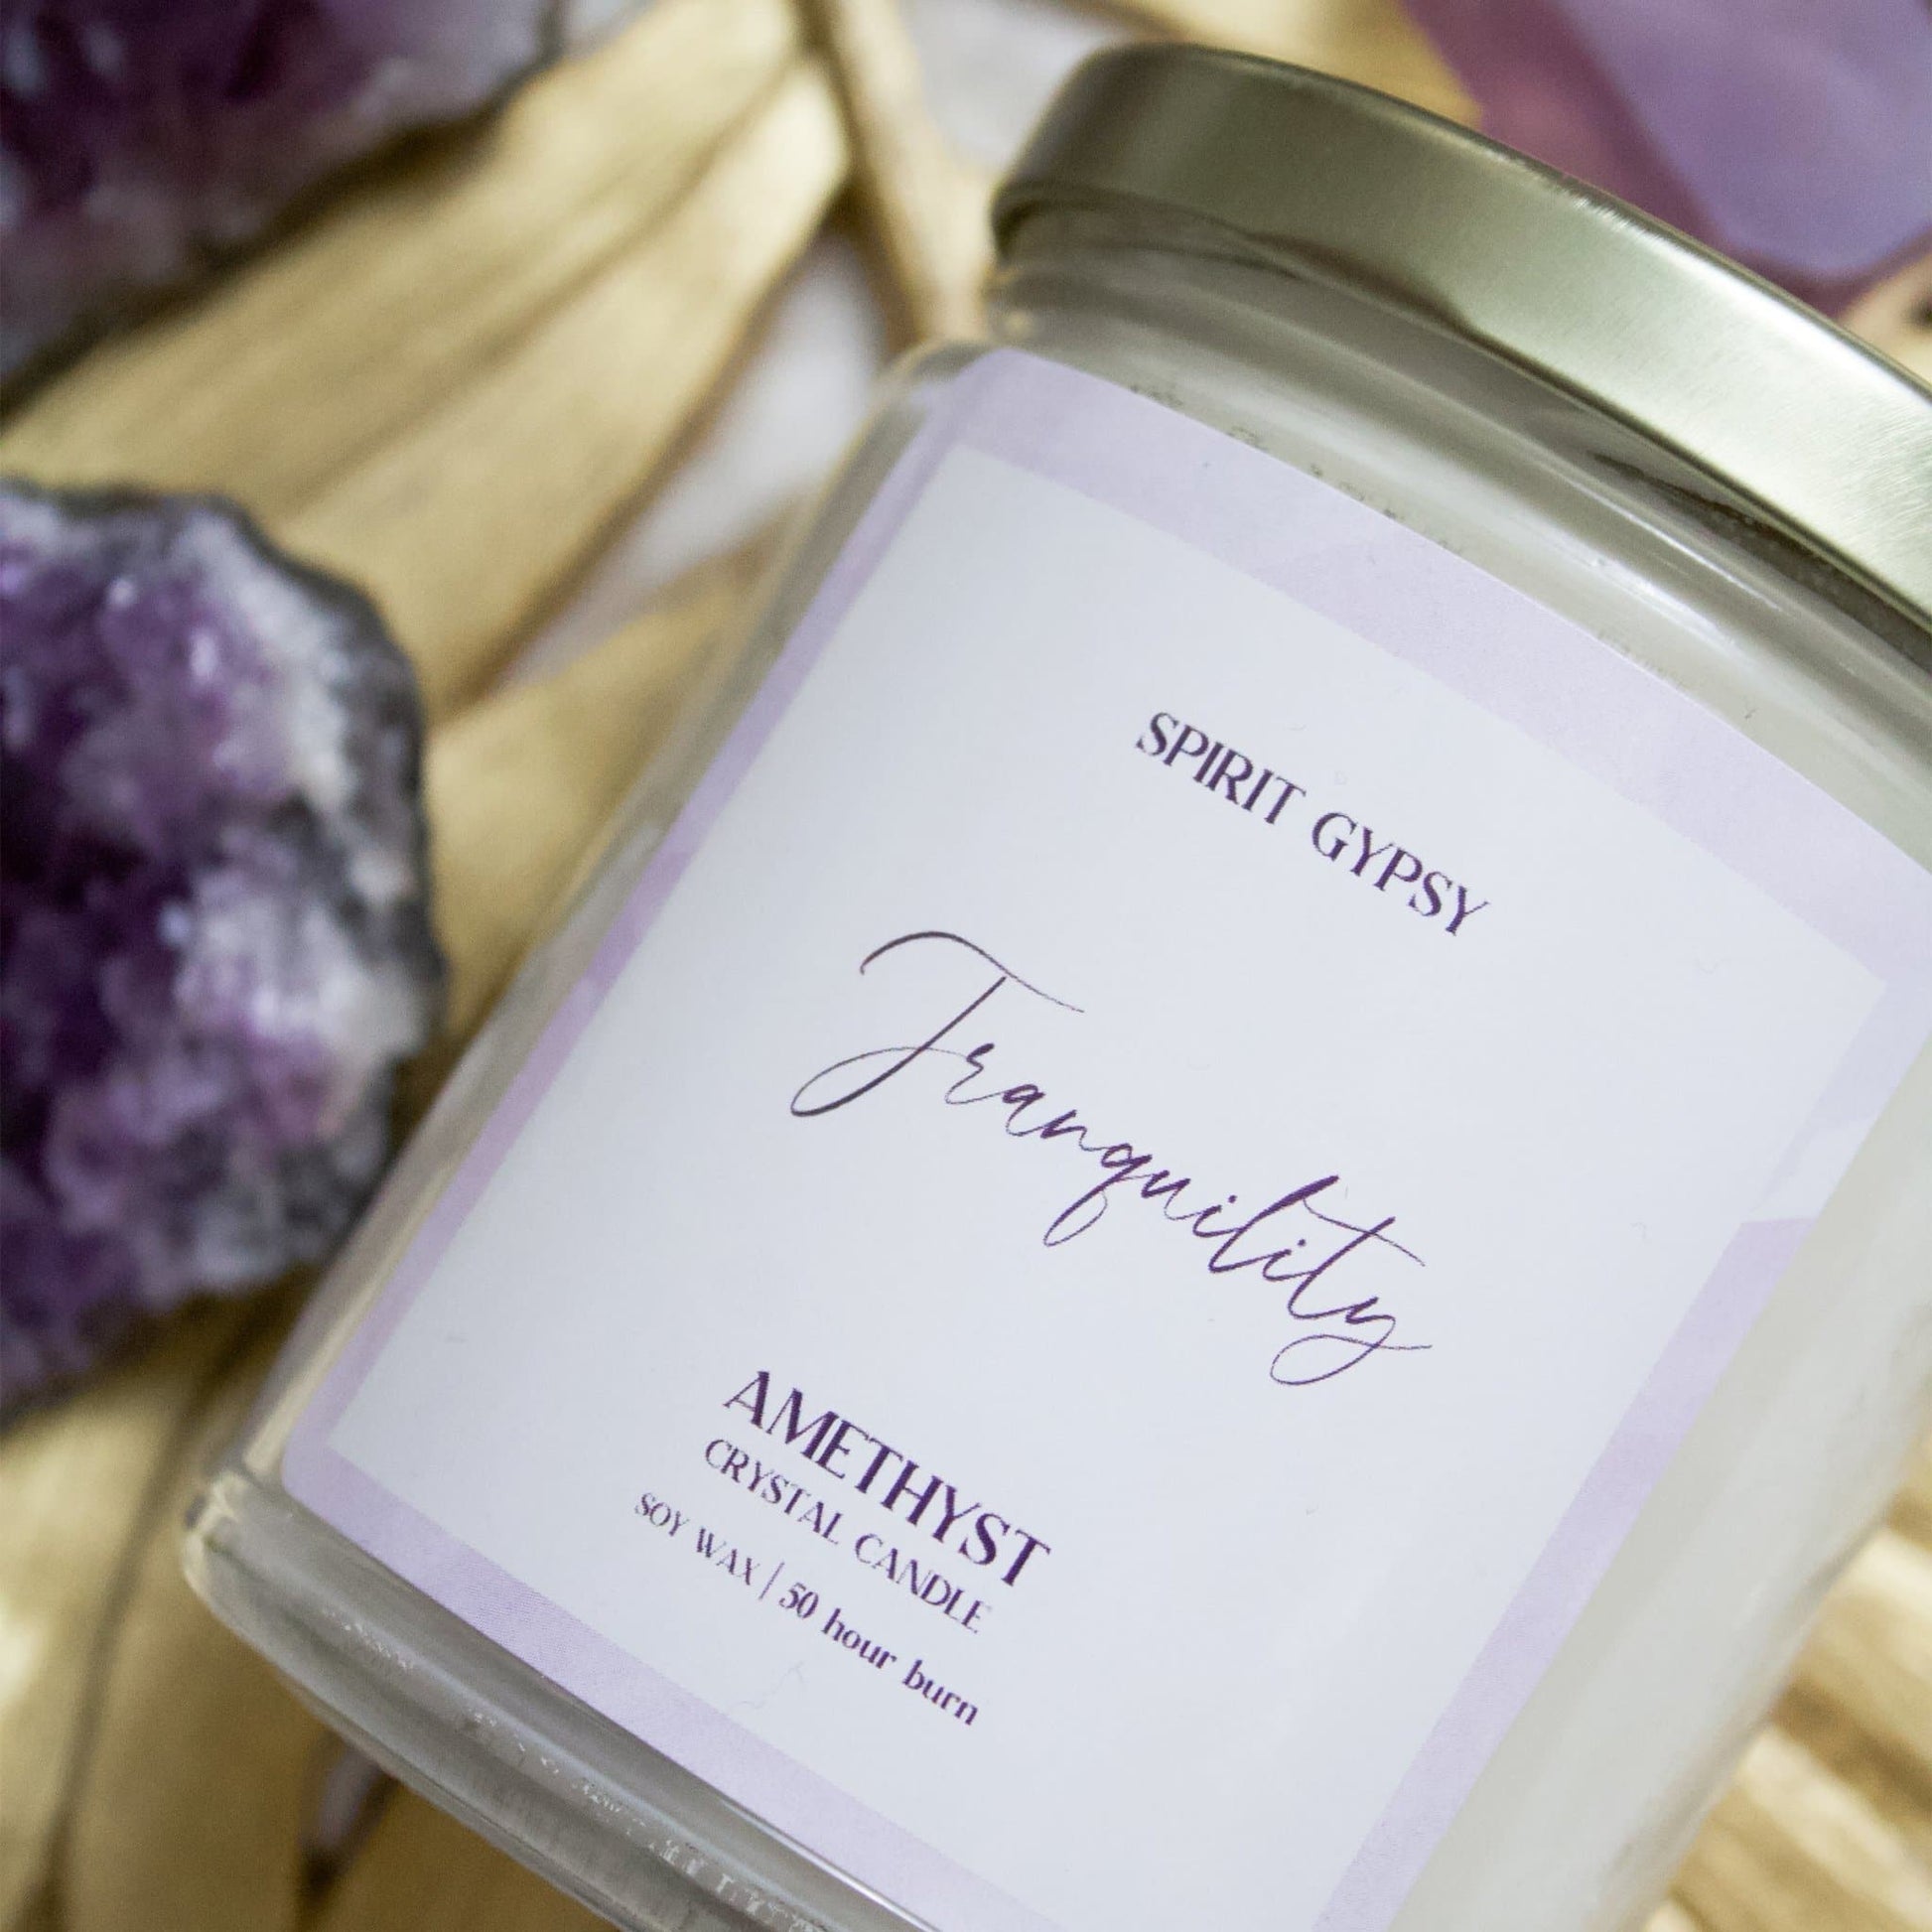 Amethyst Crystal Candle - Tranquility - Muse + Moonstone